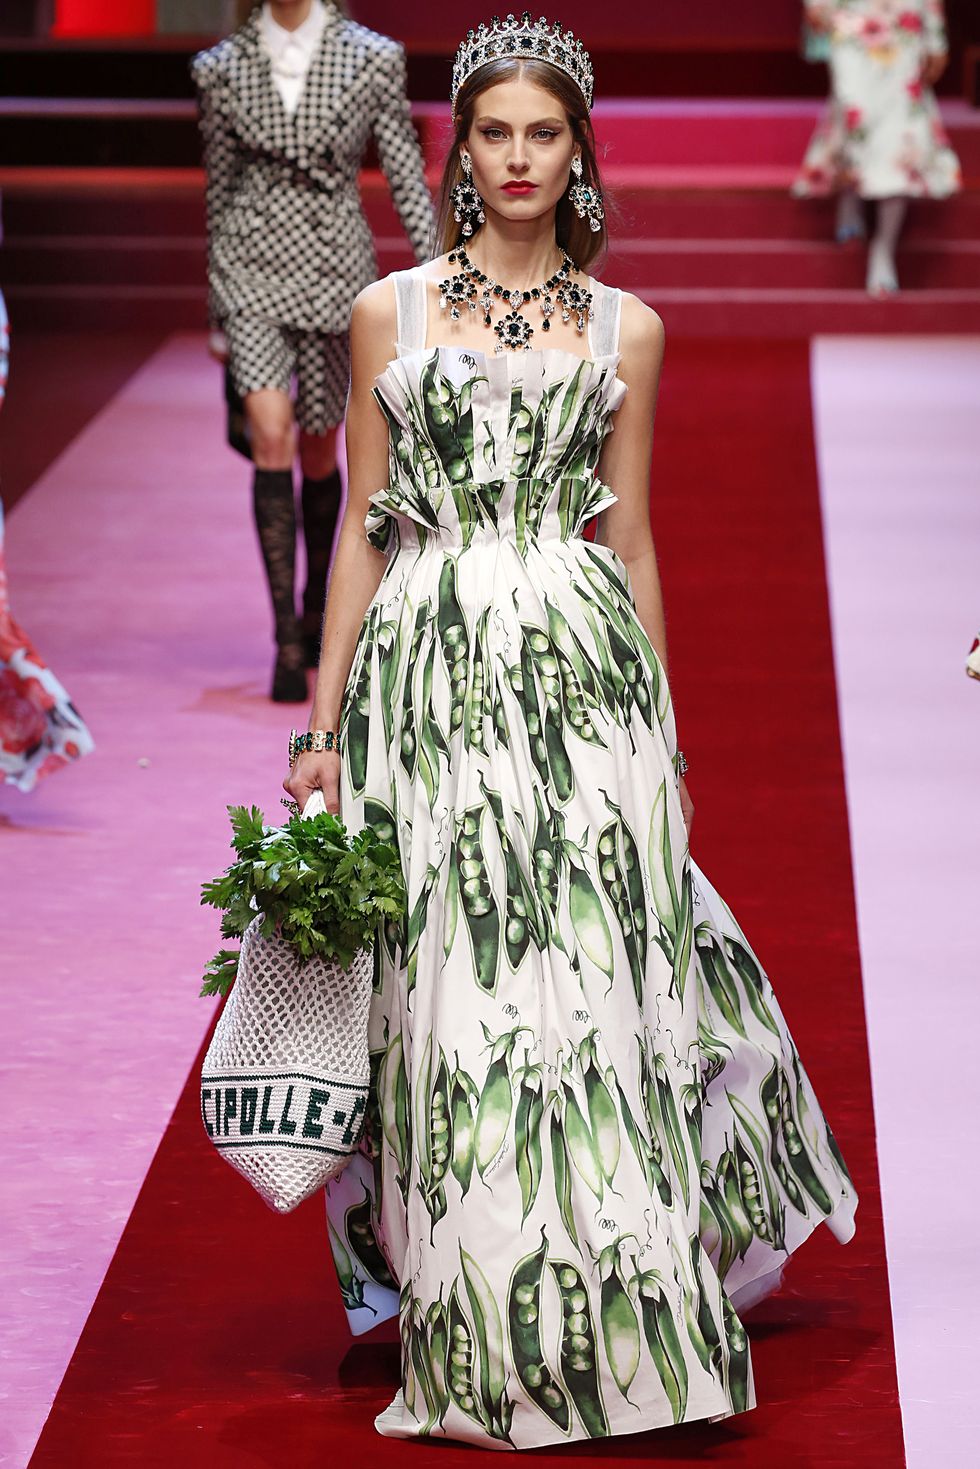 Dolce & Gabbana's Milan Runway Is Literally Delicious